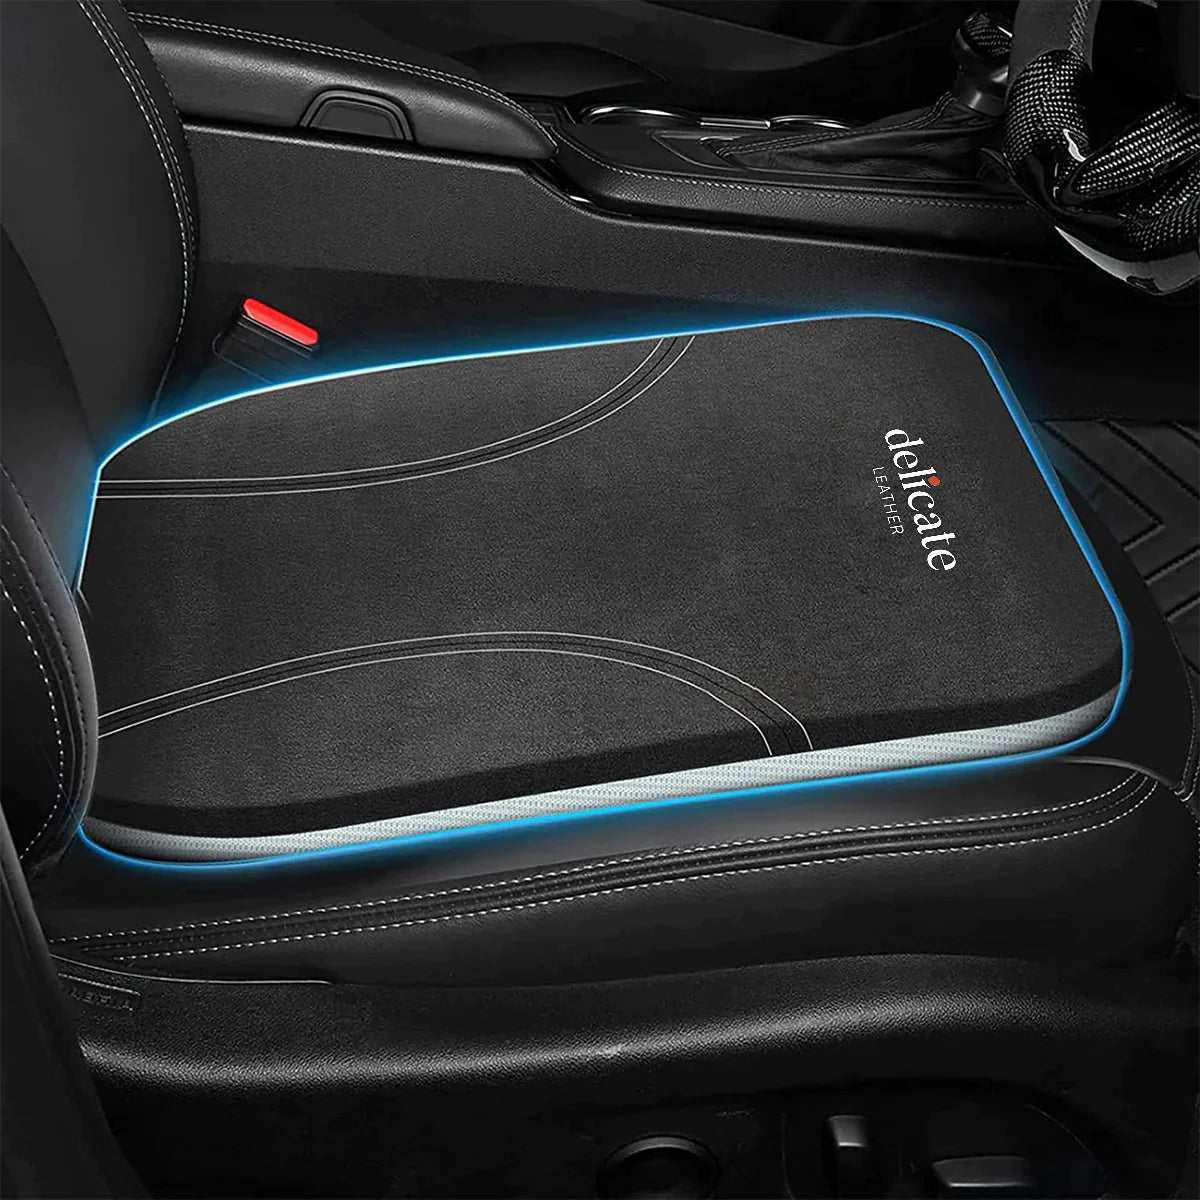 Best Car Seat Cushion For Long Distance Driving - Delicate leather